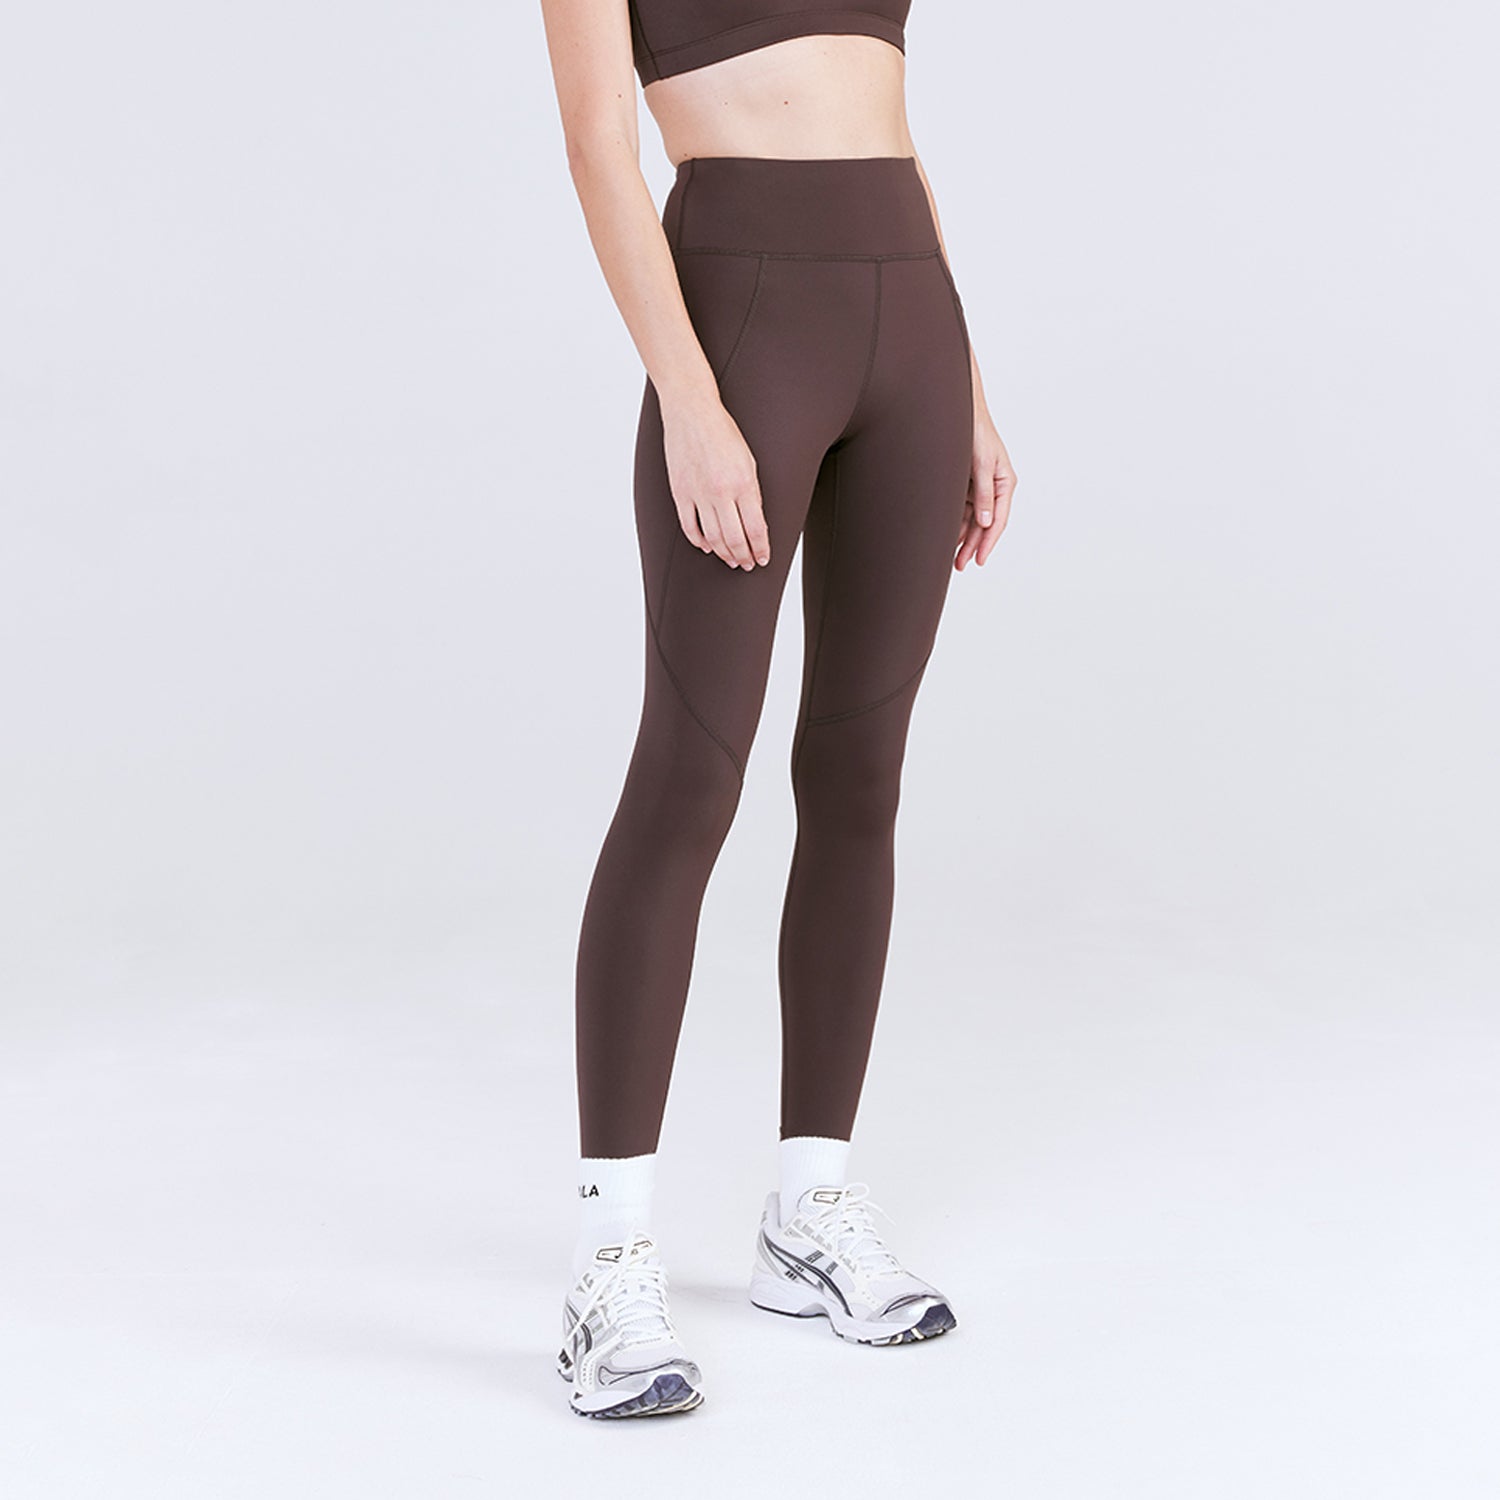 We are TALA. Activewear you'll feel good in, and good about.